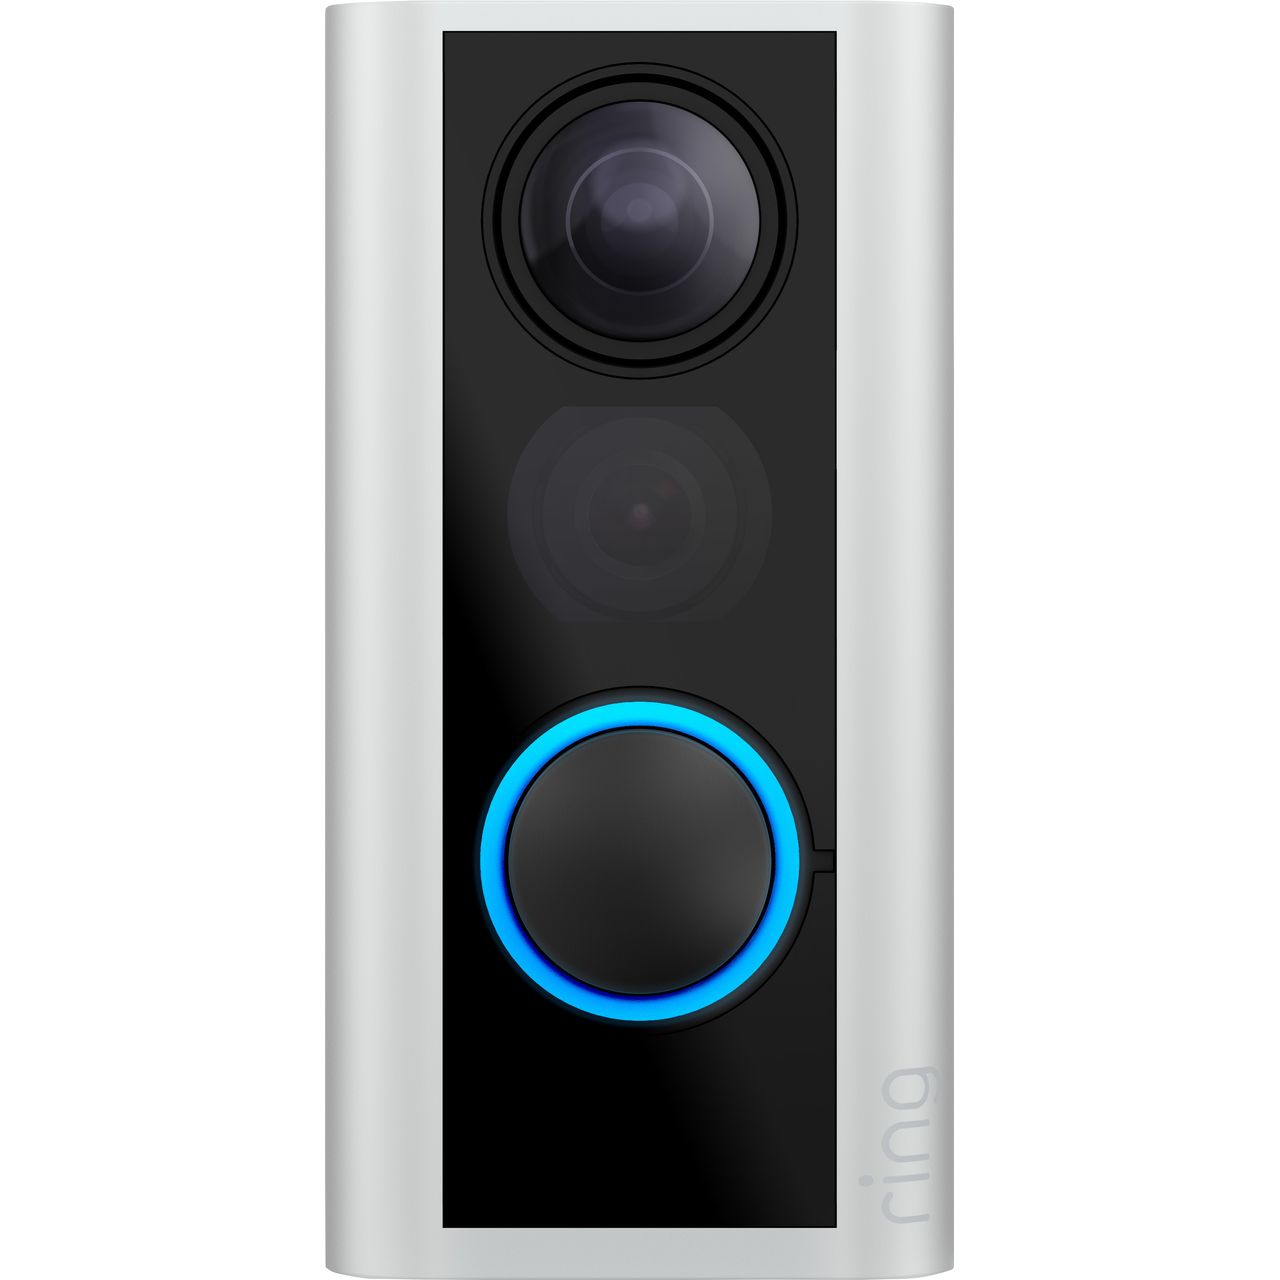 Ring Door View Cam Includes Quick Release Battery Full HD Review